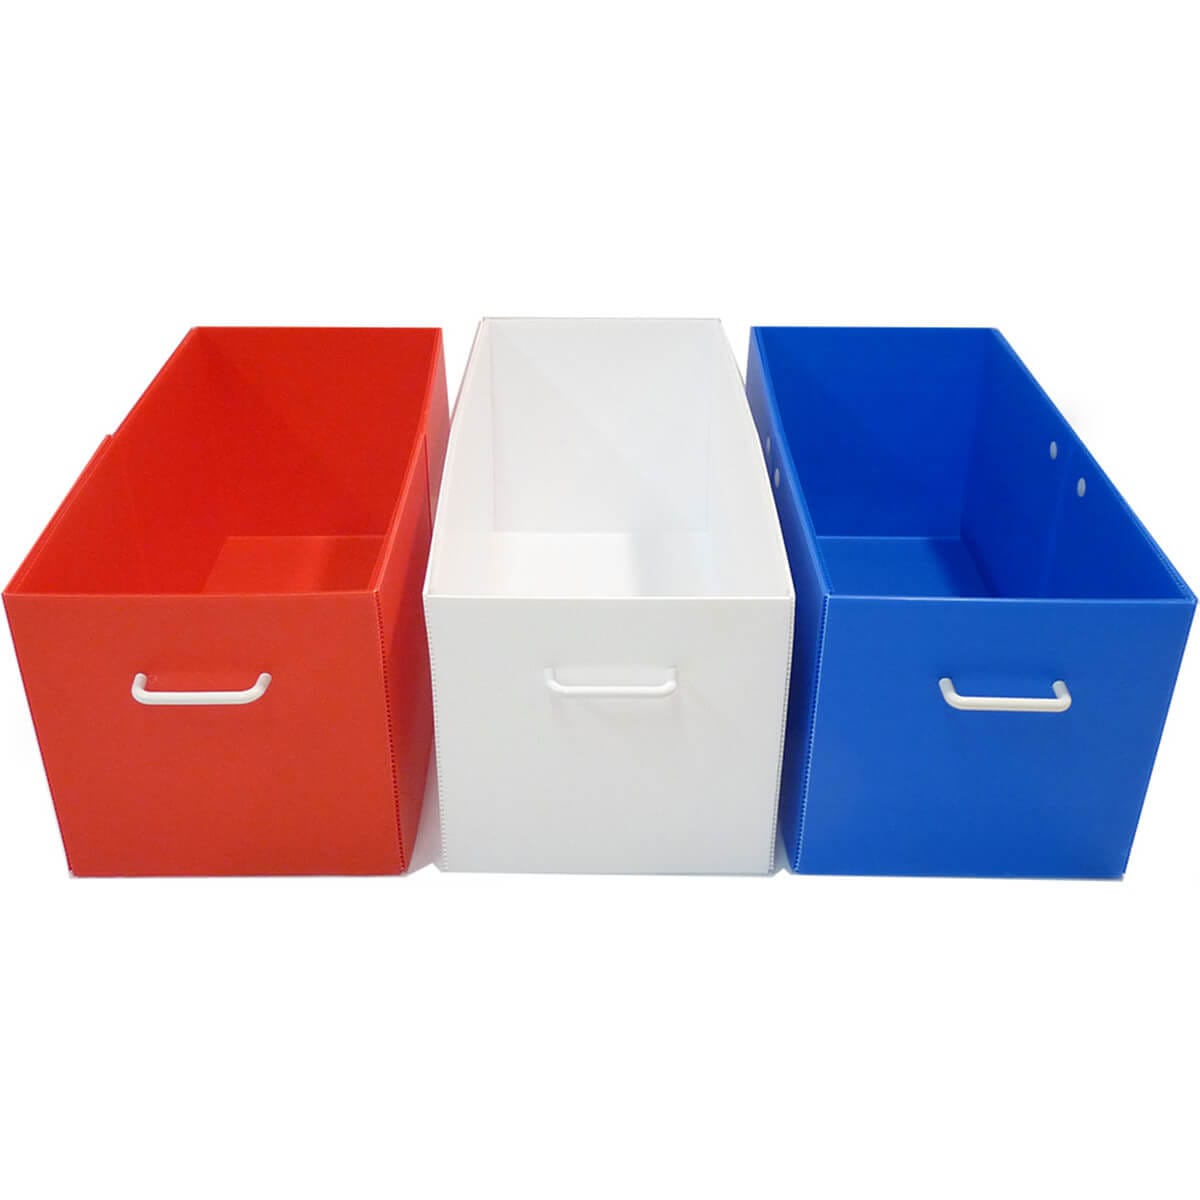 Three colorful standard storage bins for use with a stand and C&C guinea pig cage